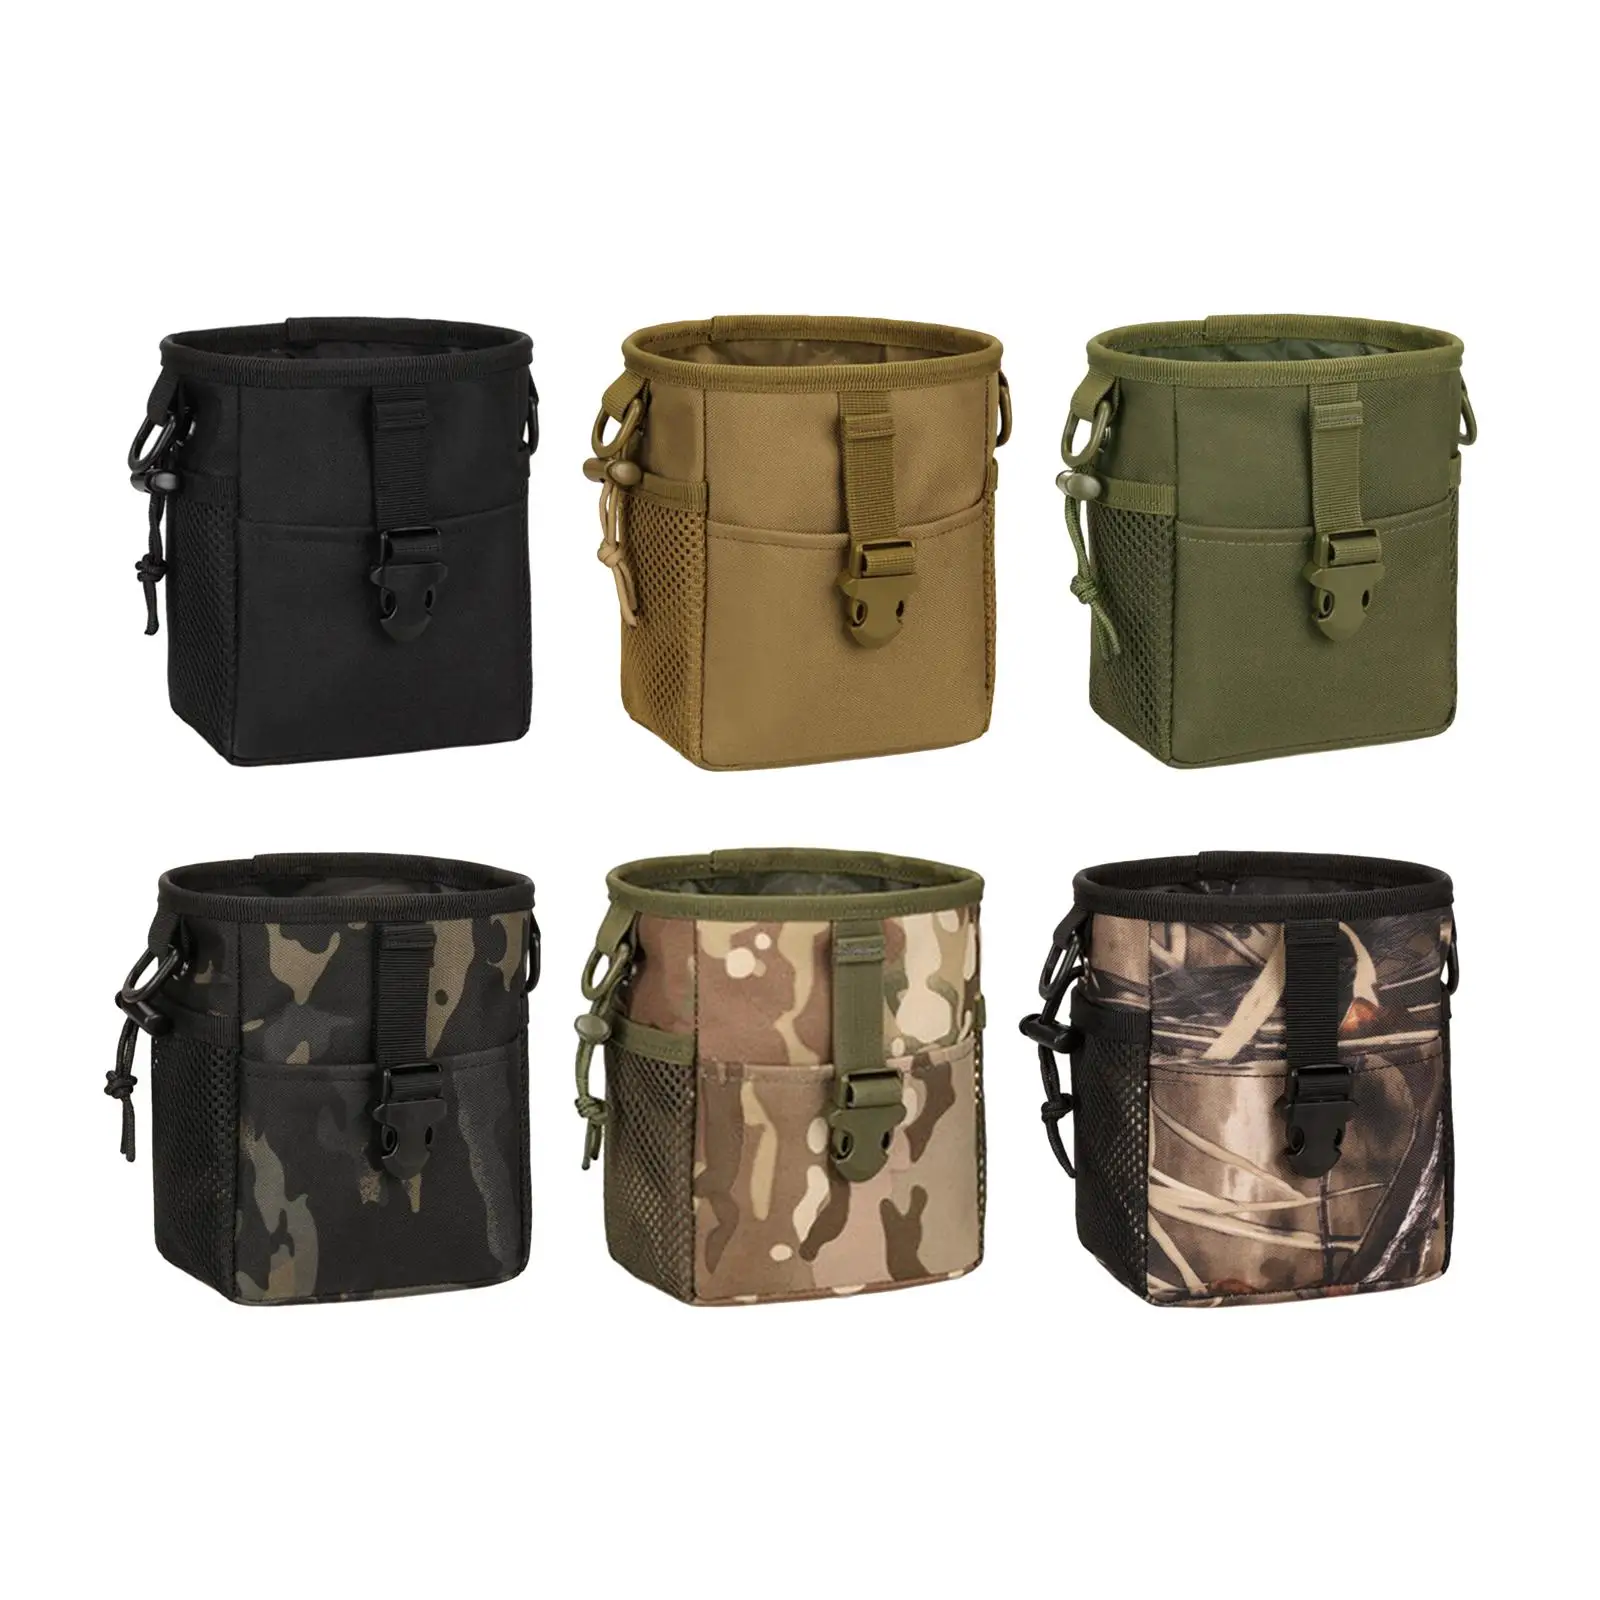 Pouch Bag Holder Multi Use Utility Accessories Hanging Pack Portable Durable Waist Bag for Gadget Camping Hunting Hiking Phone